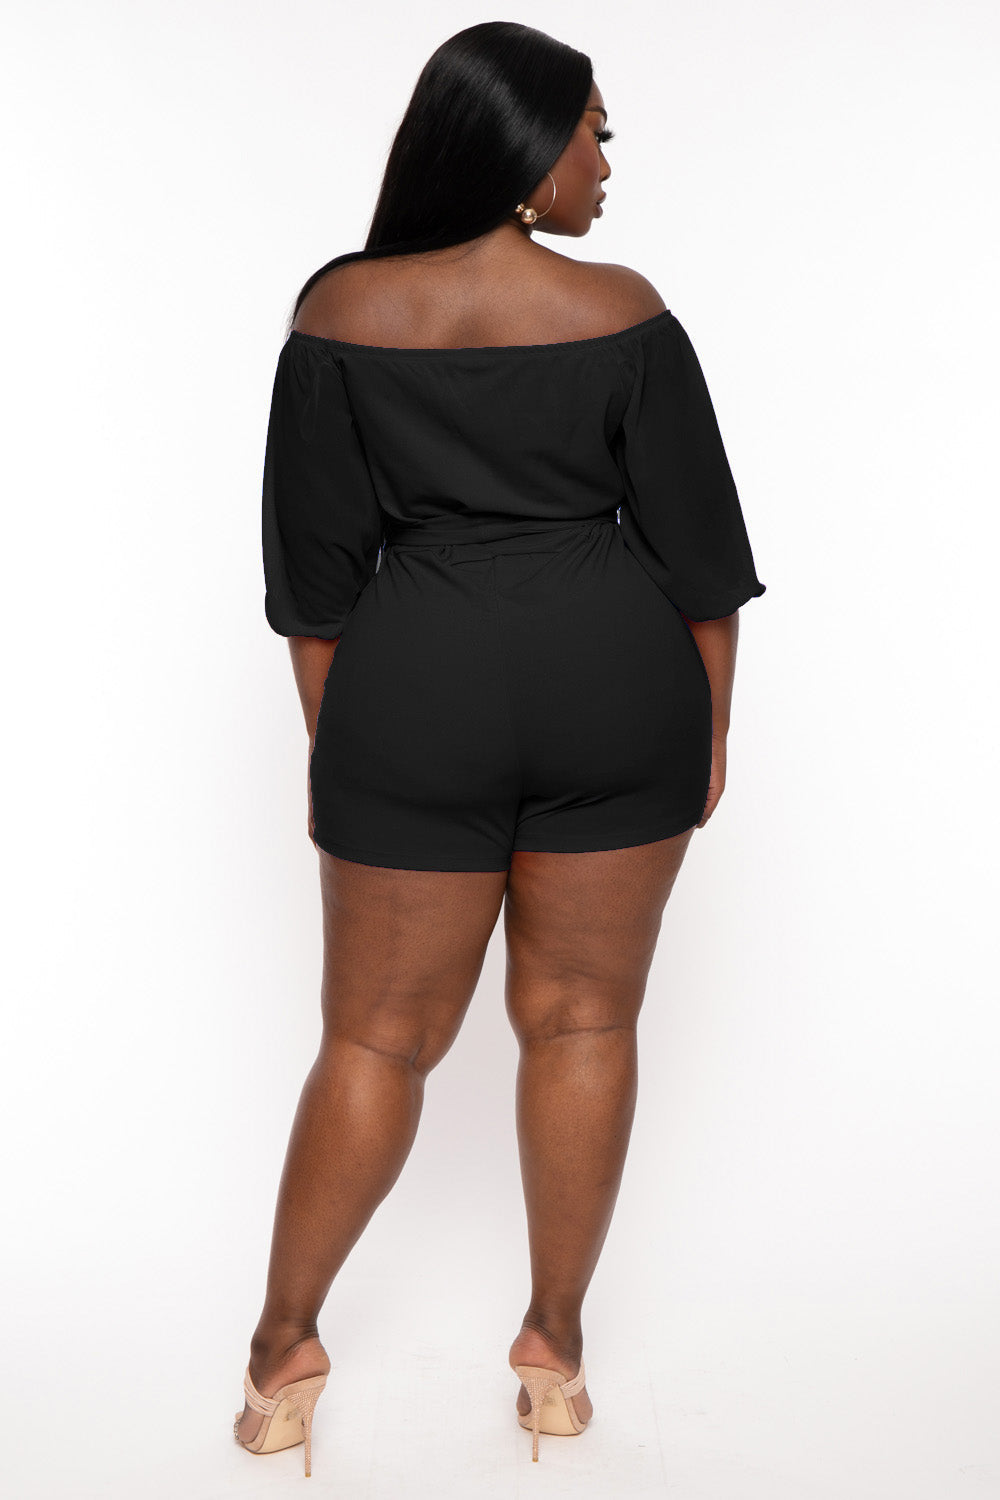 Find Me Jumpsuits and Rompers Plus Size Aryana Cross Over Romper - Black